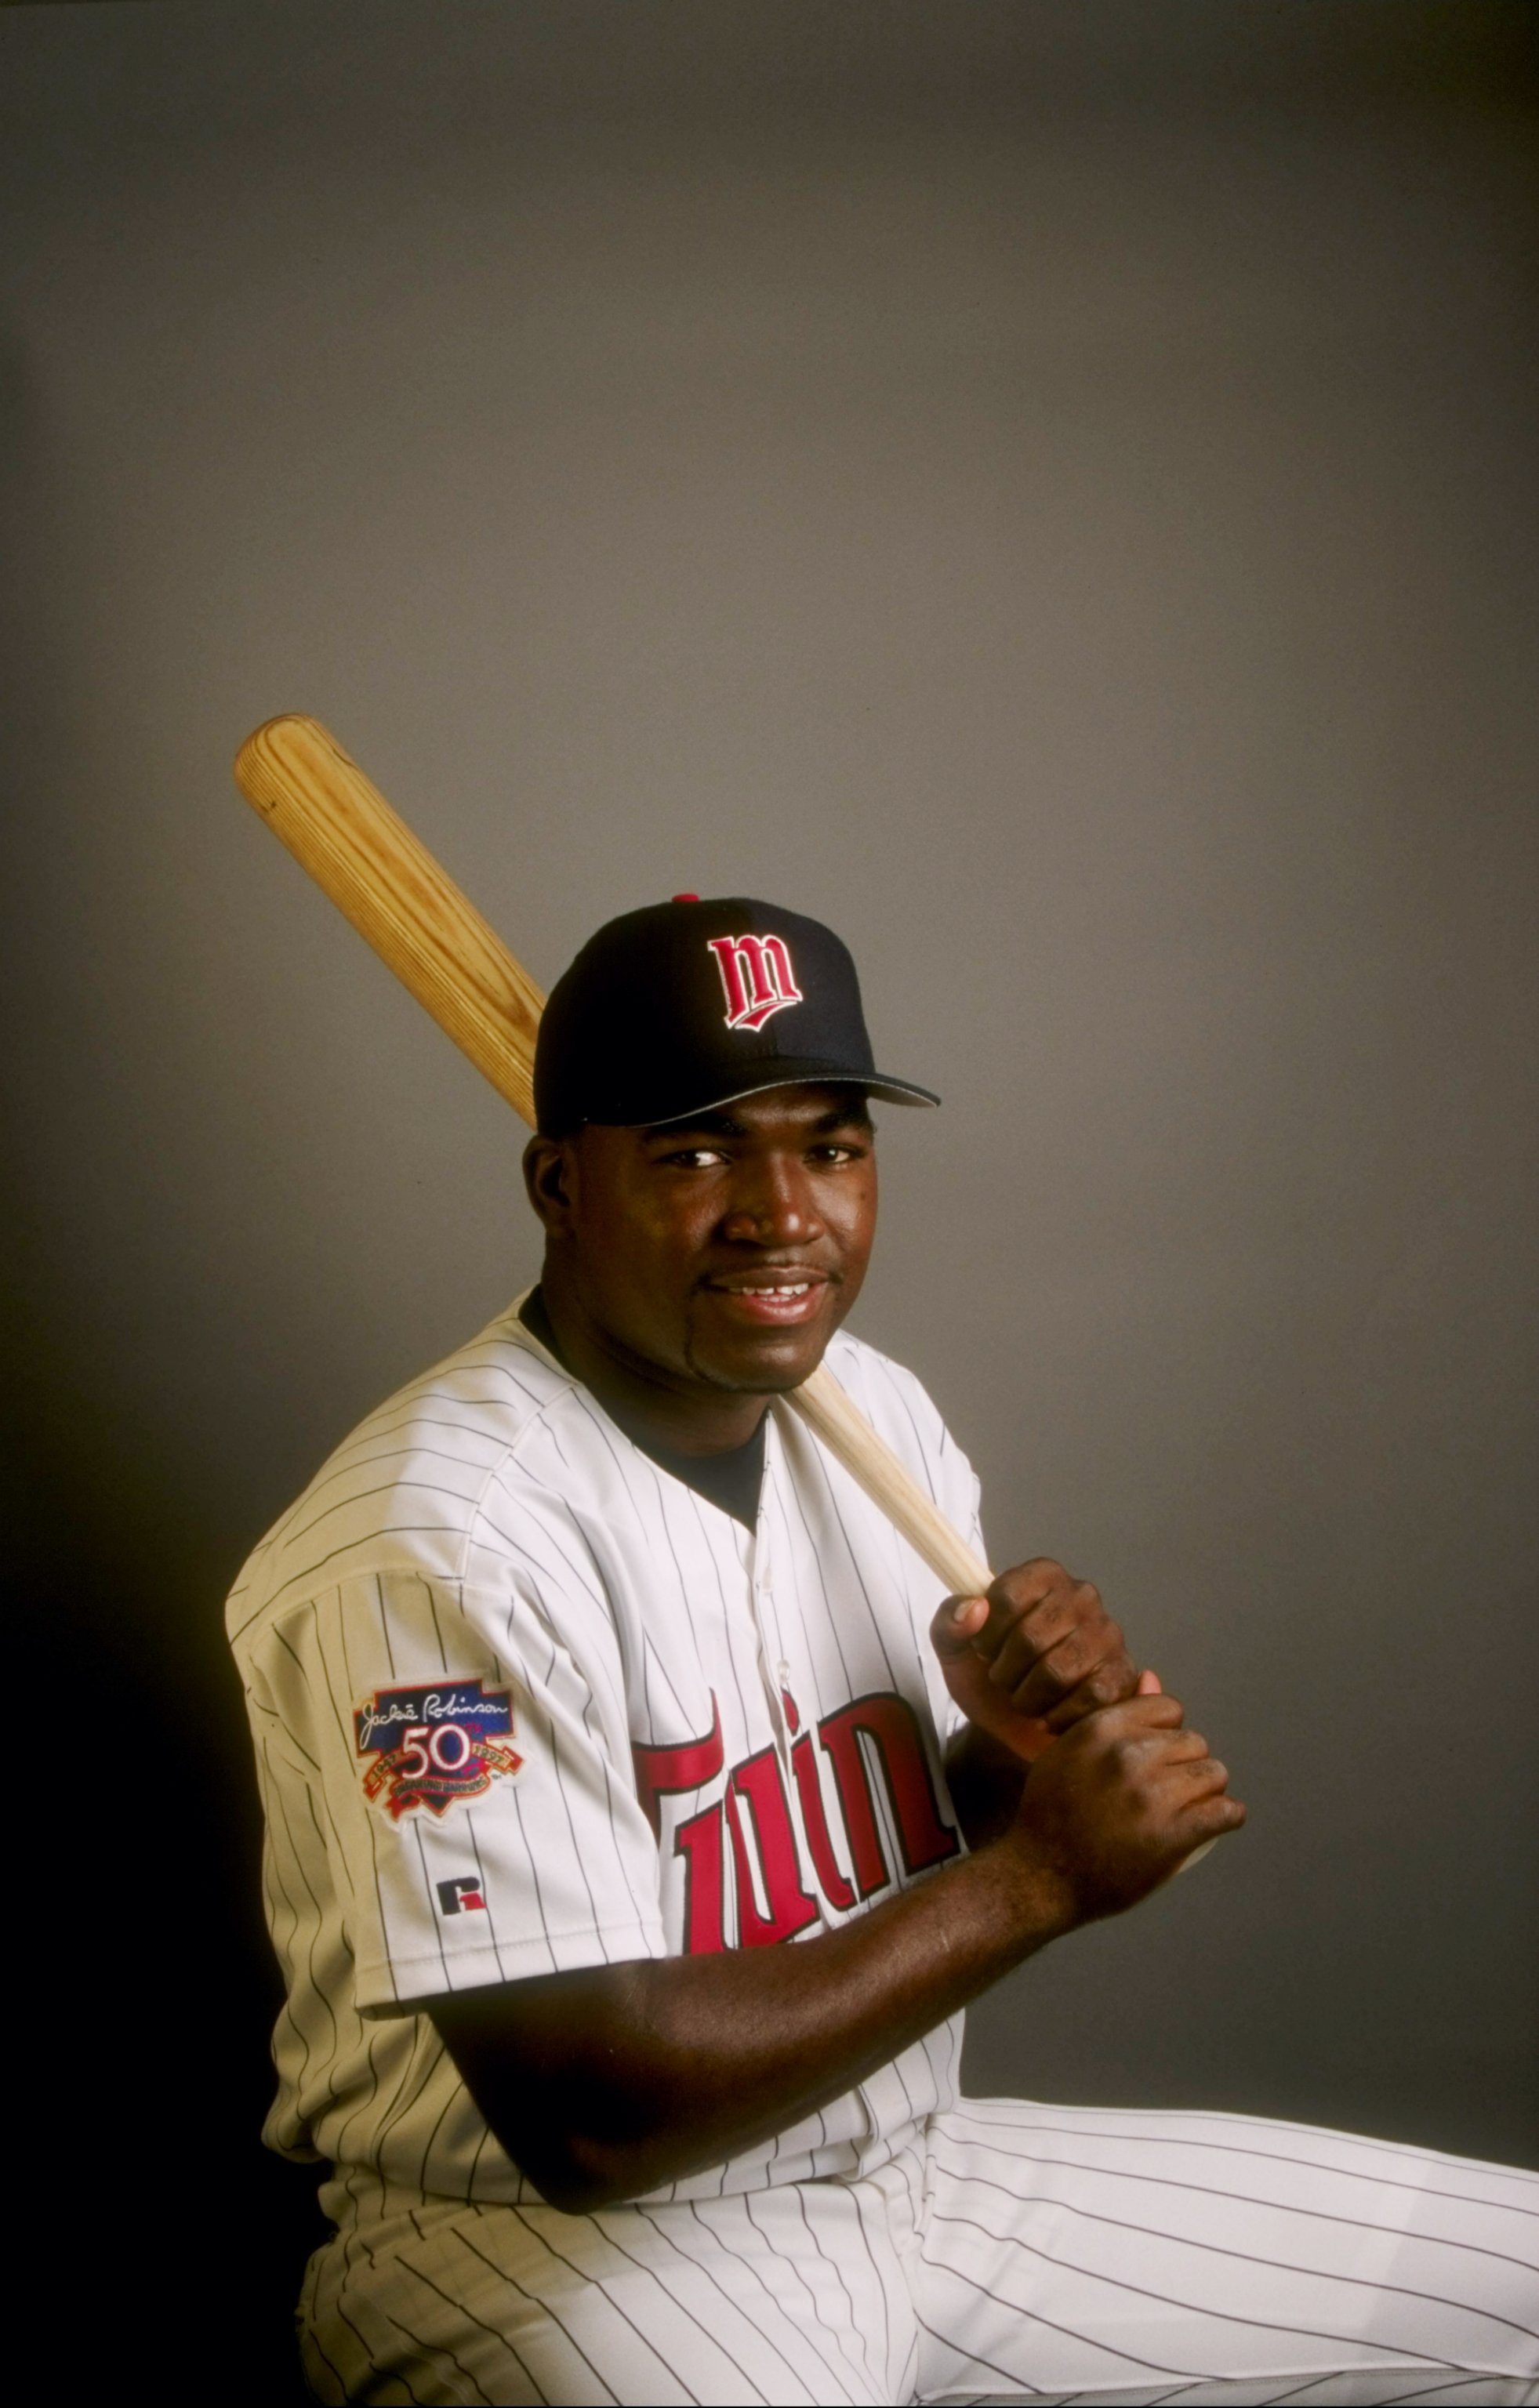 David Ortiz made his debut with the Twins in September 1997. His first full season in the majors was 1998. Here he is during spring training of that season.